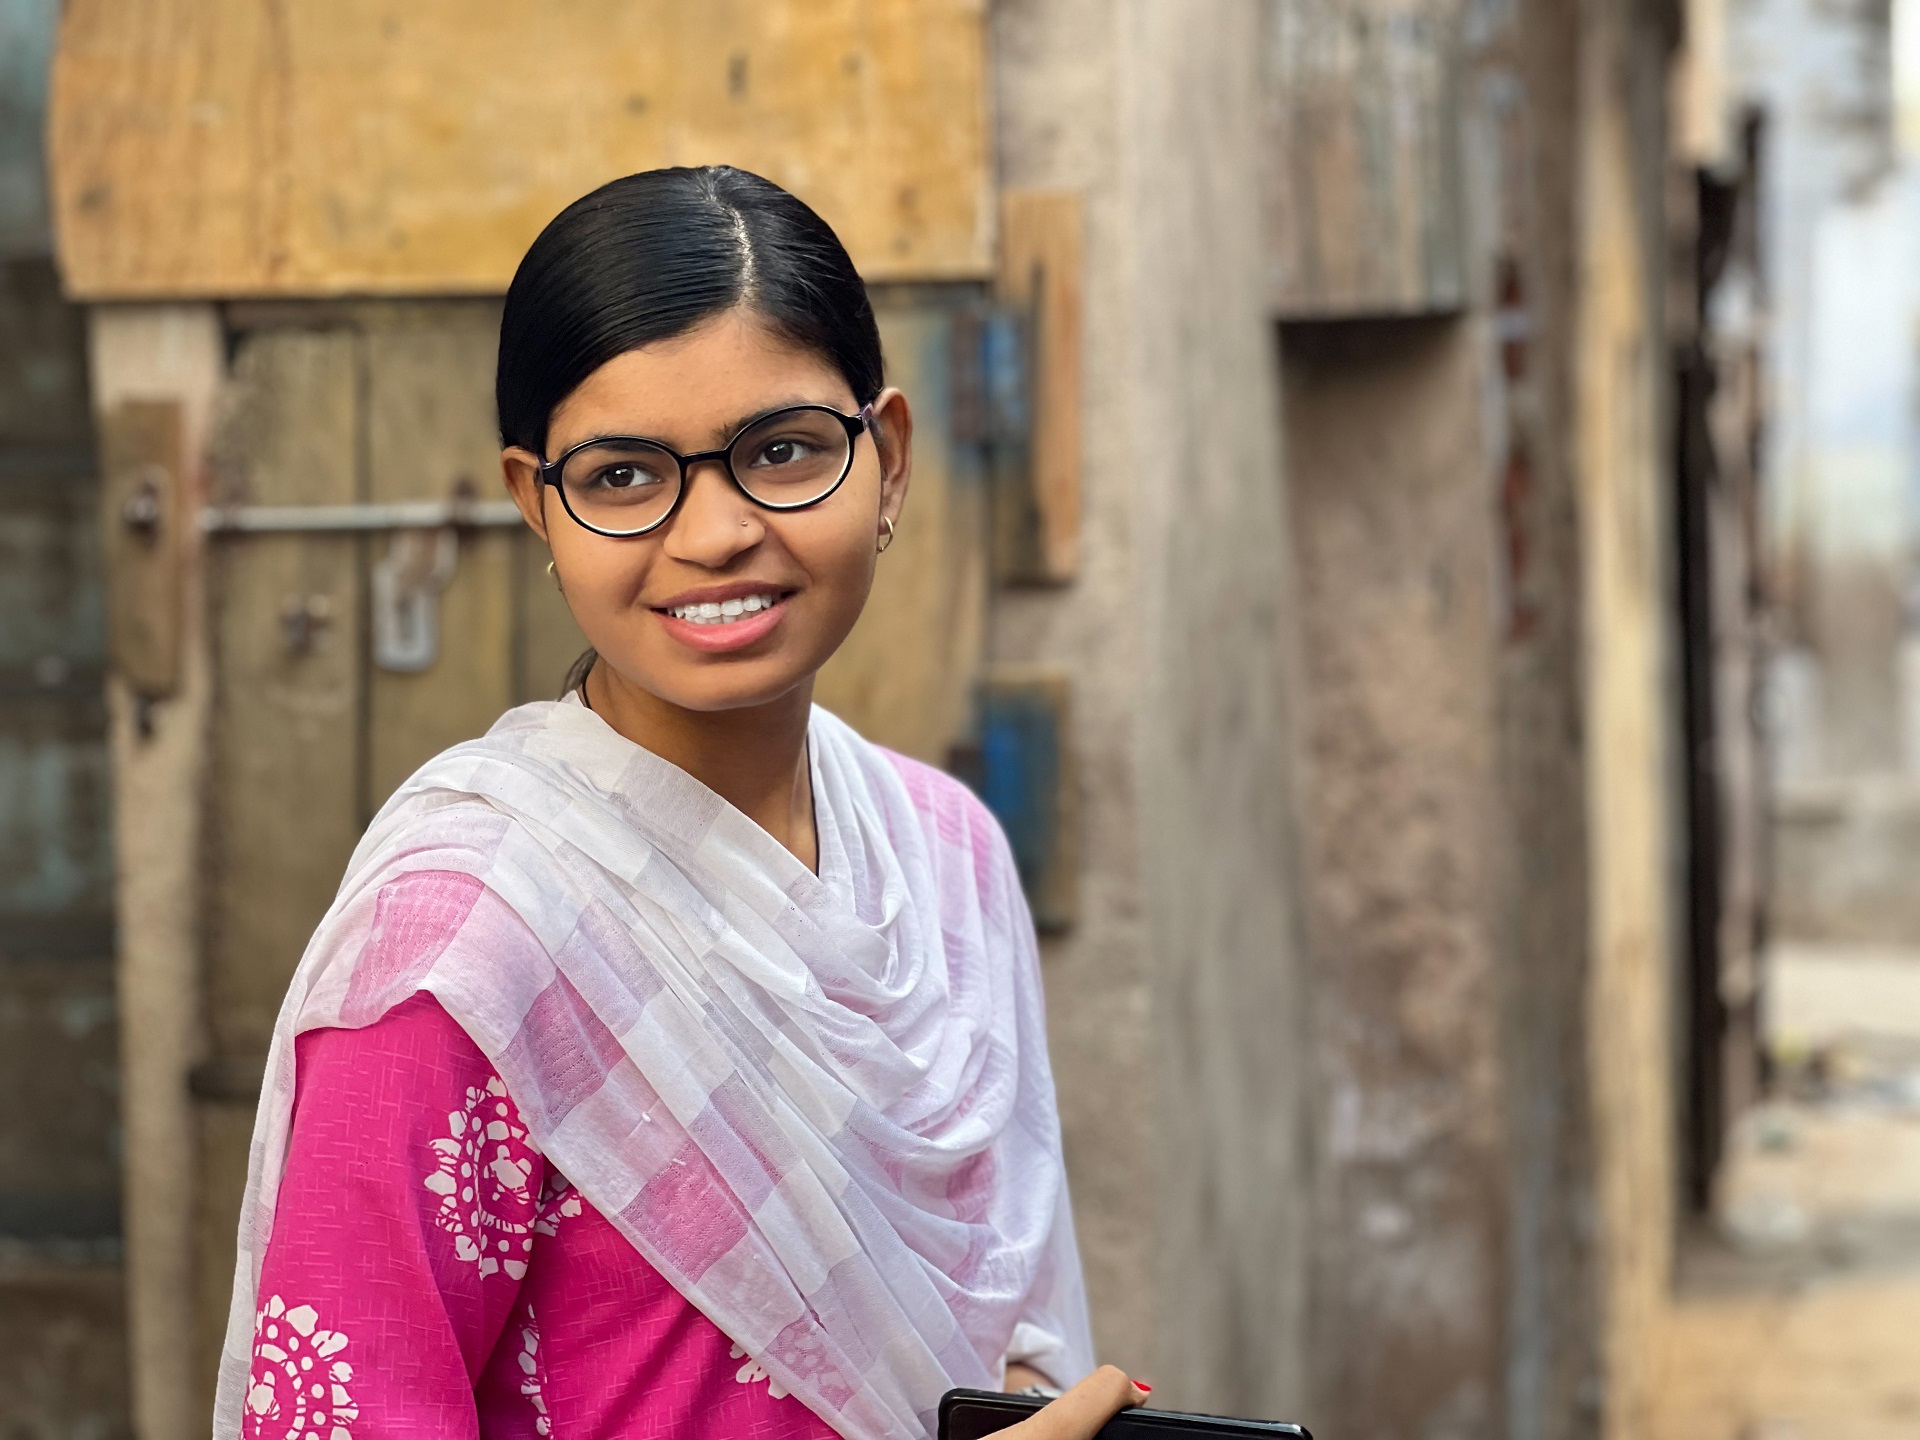 A spectacled girl in a village smiling away from the camera.